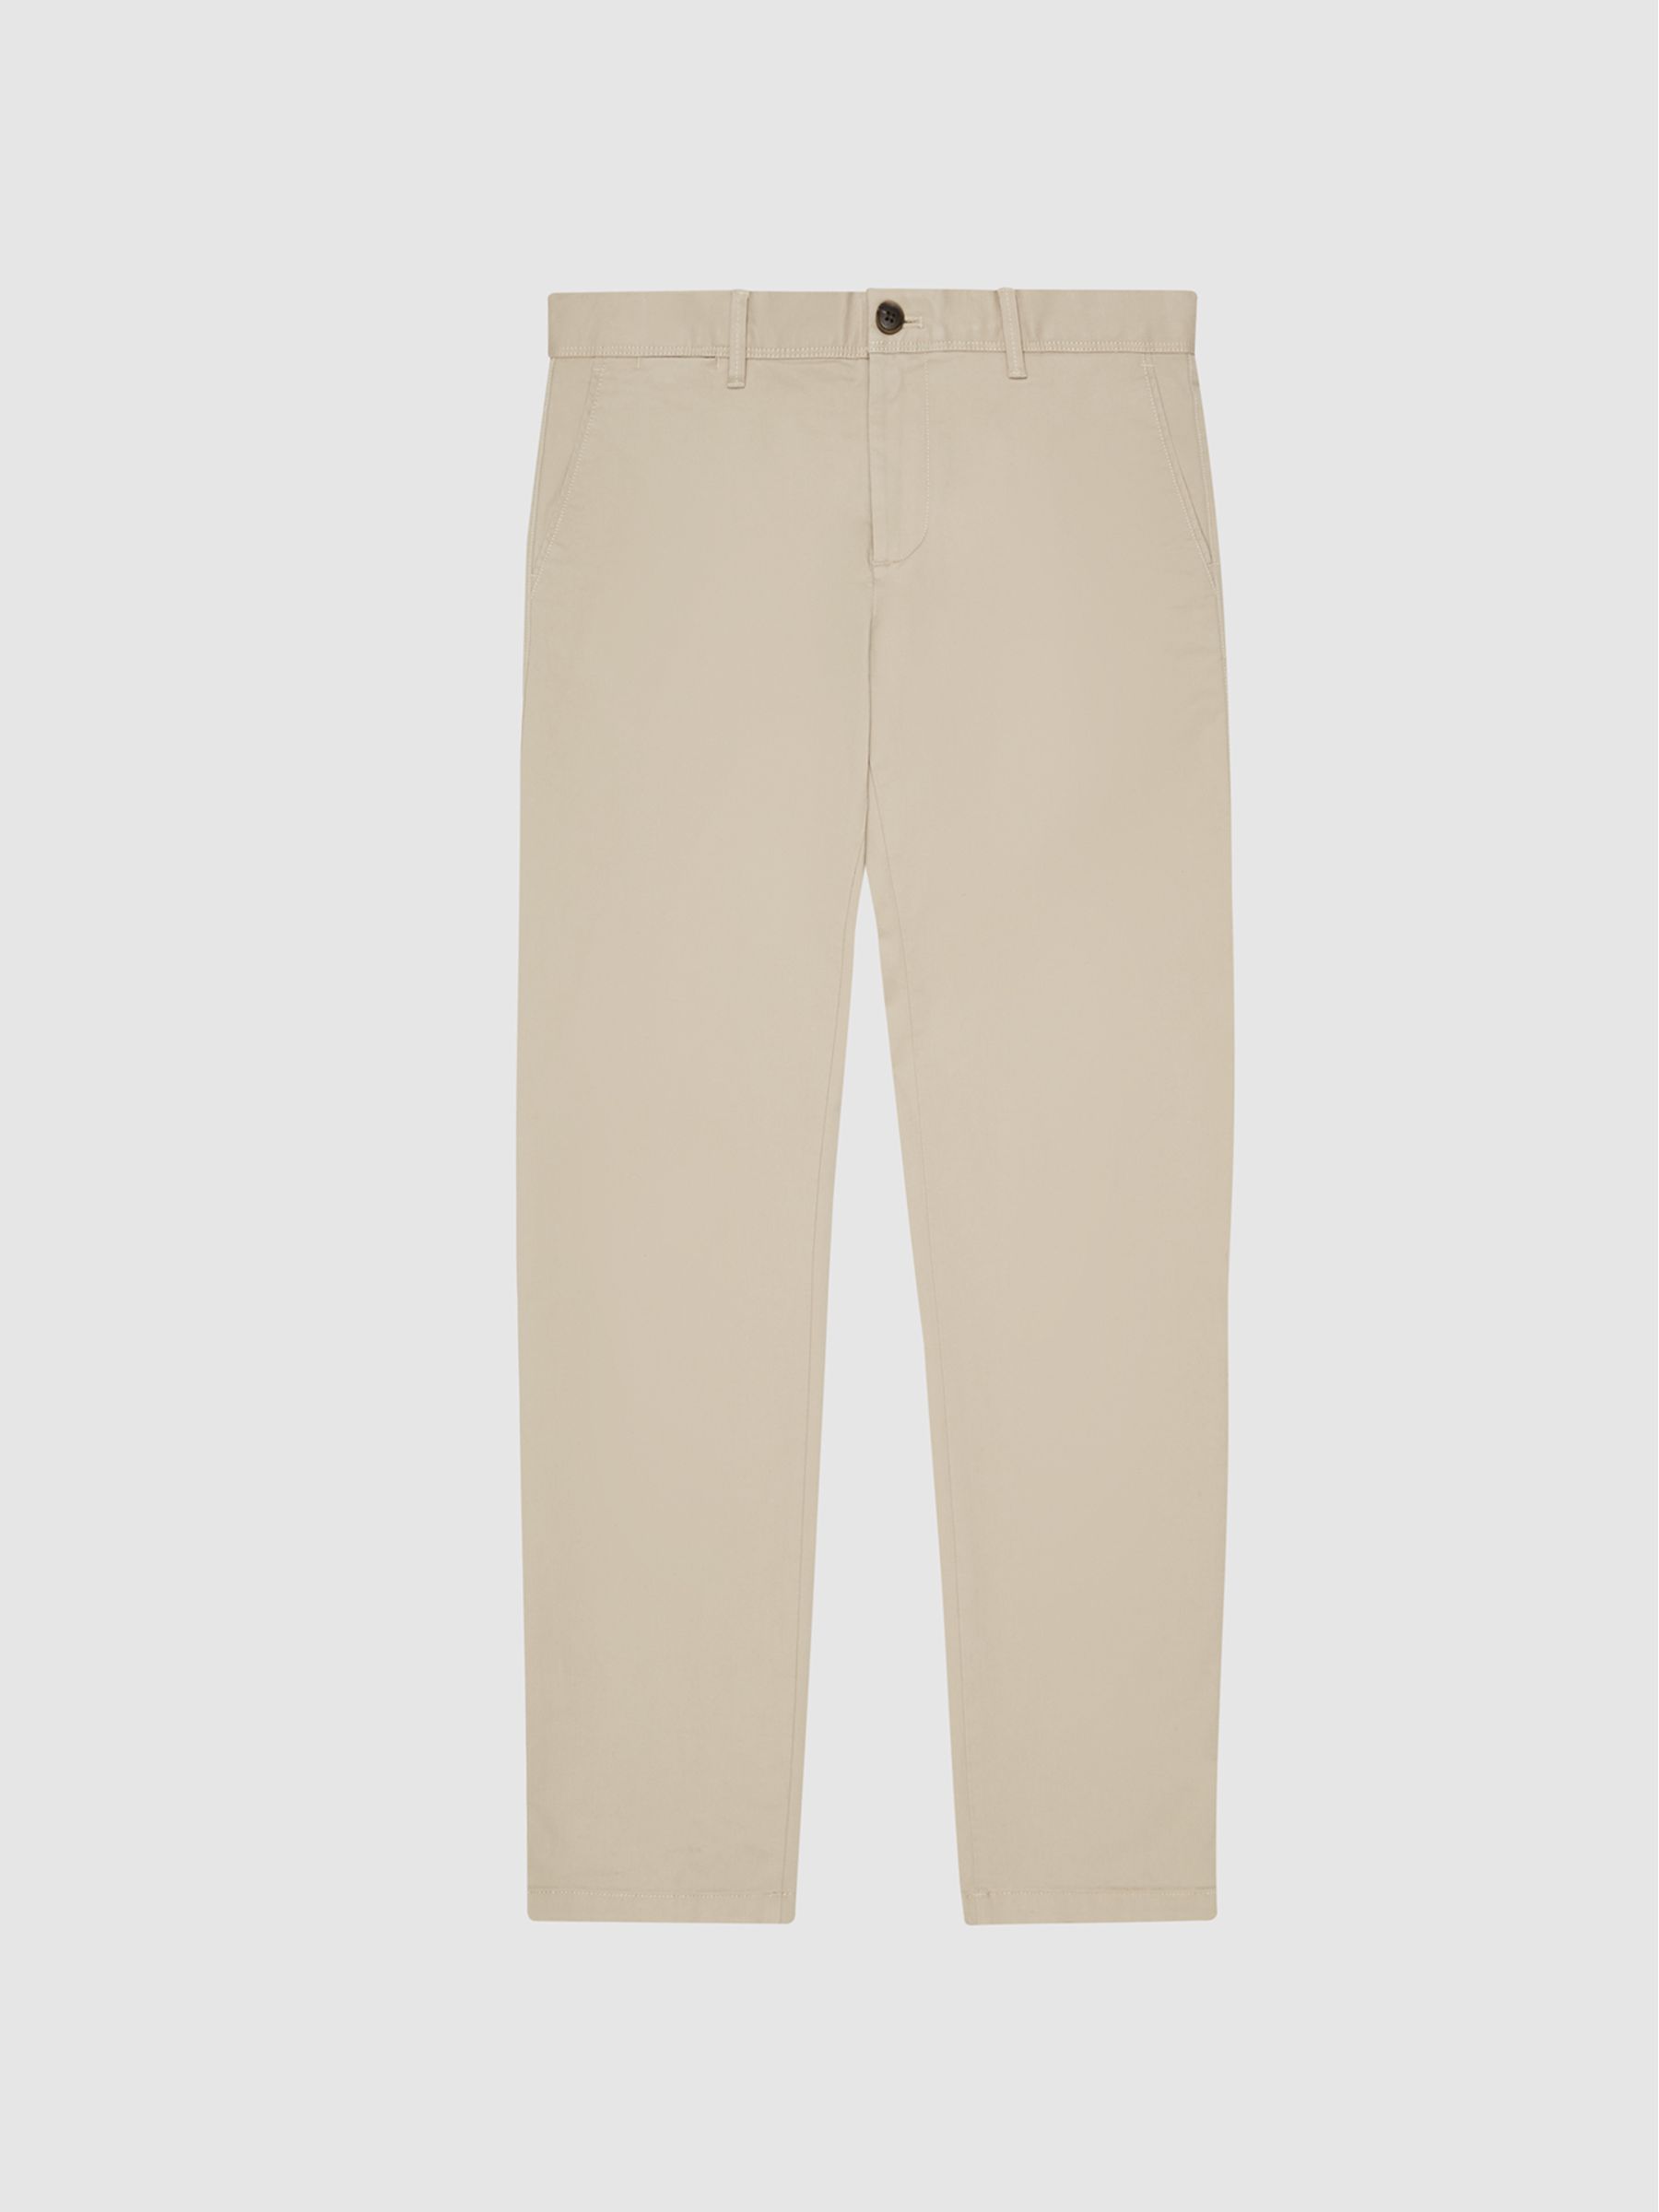 Reiss Pitch Washed Slim Fit Chinos - REISS